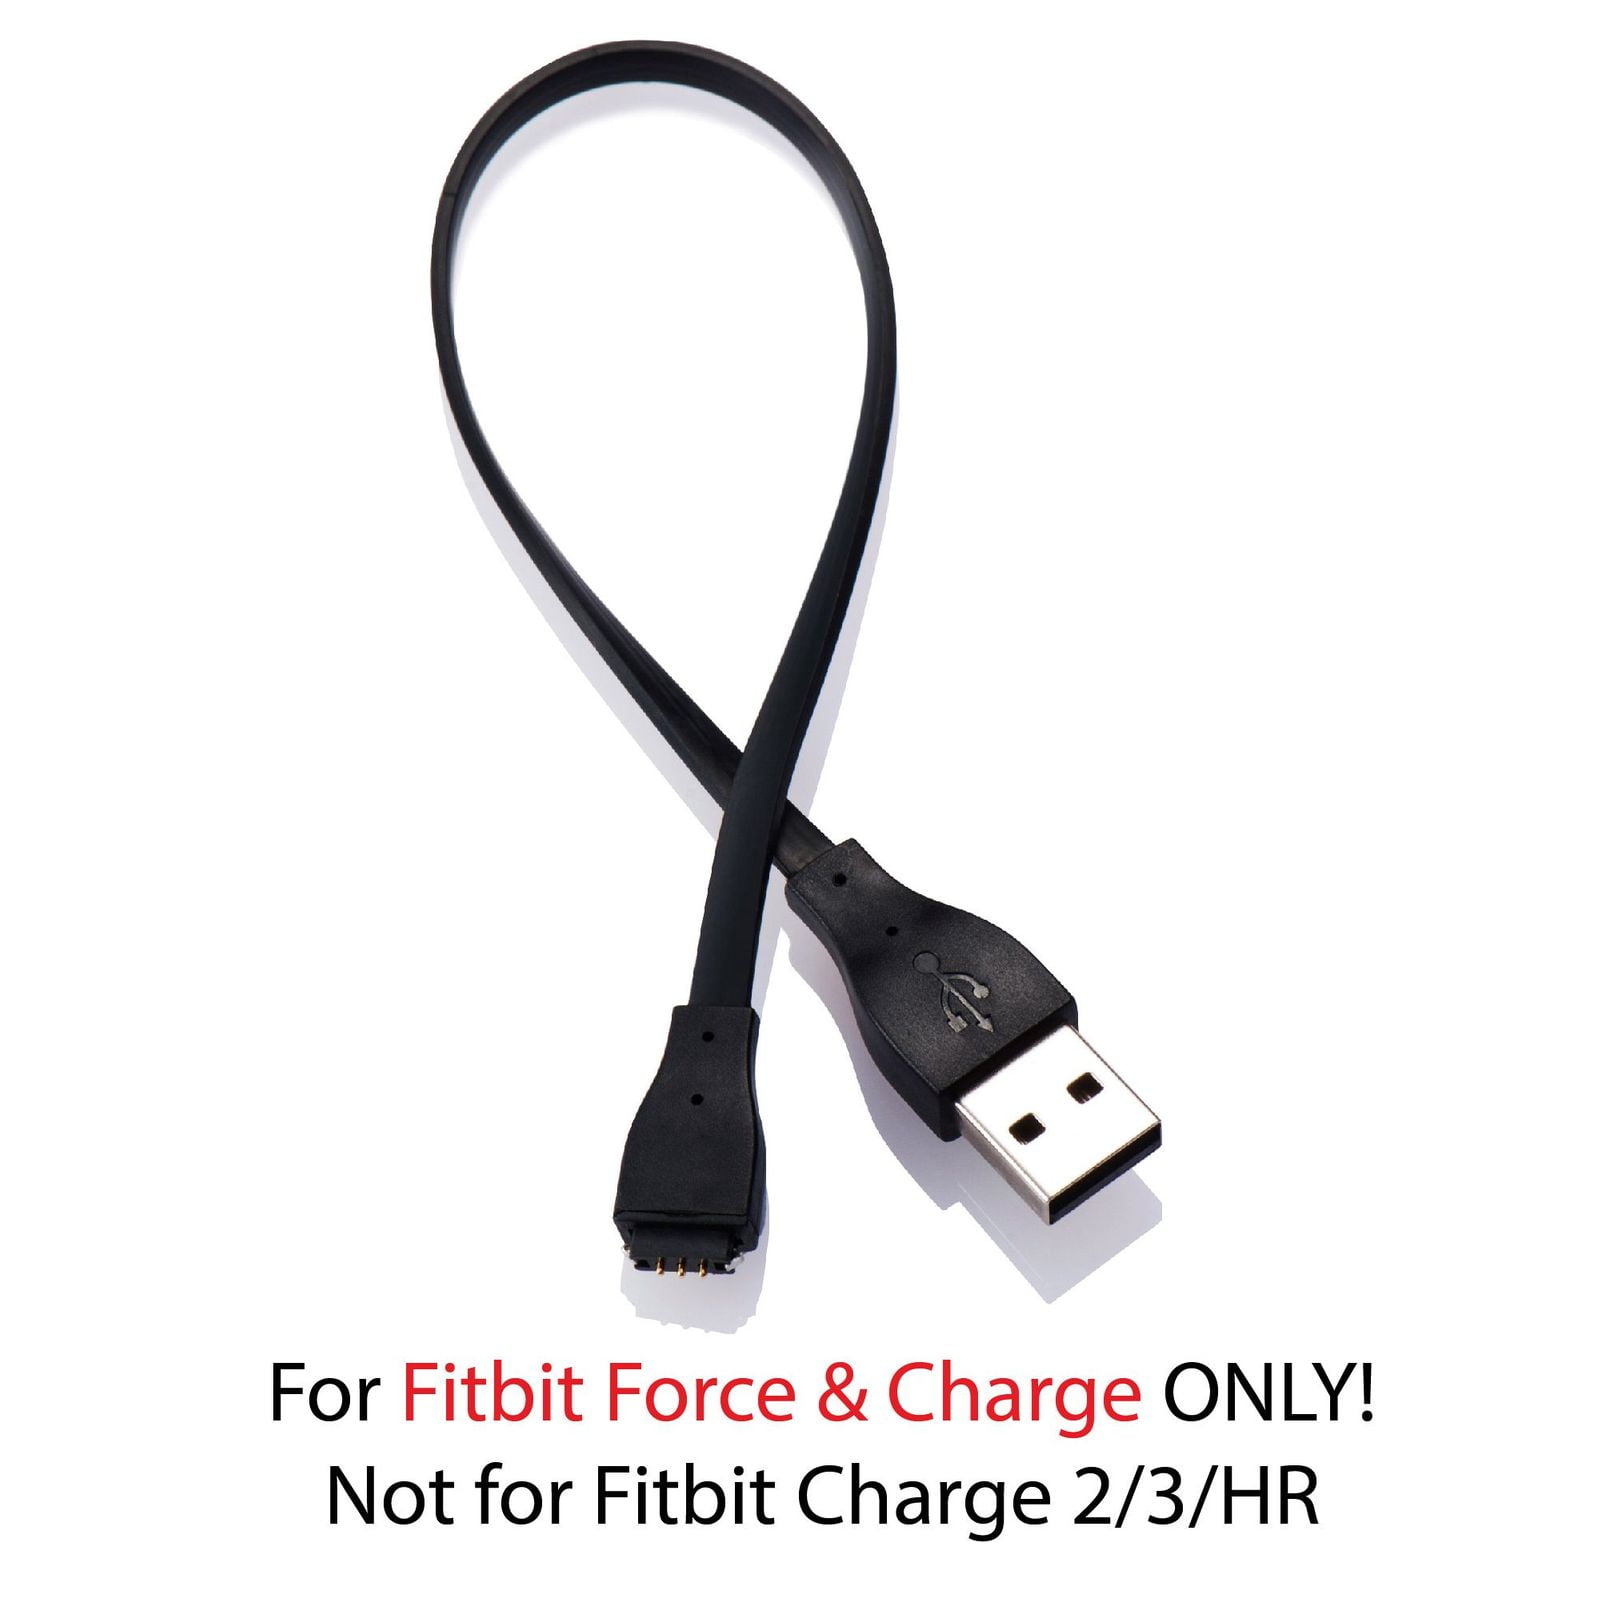 USB Charger Charging Cable For Fitbit Charge HR Wireless Activity Wristband Kd 